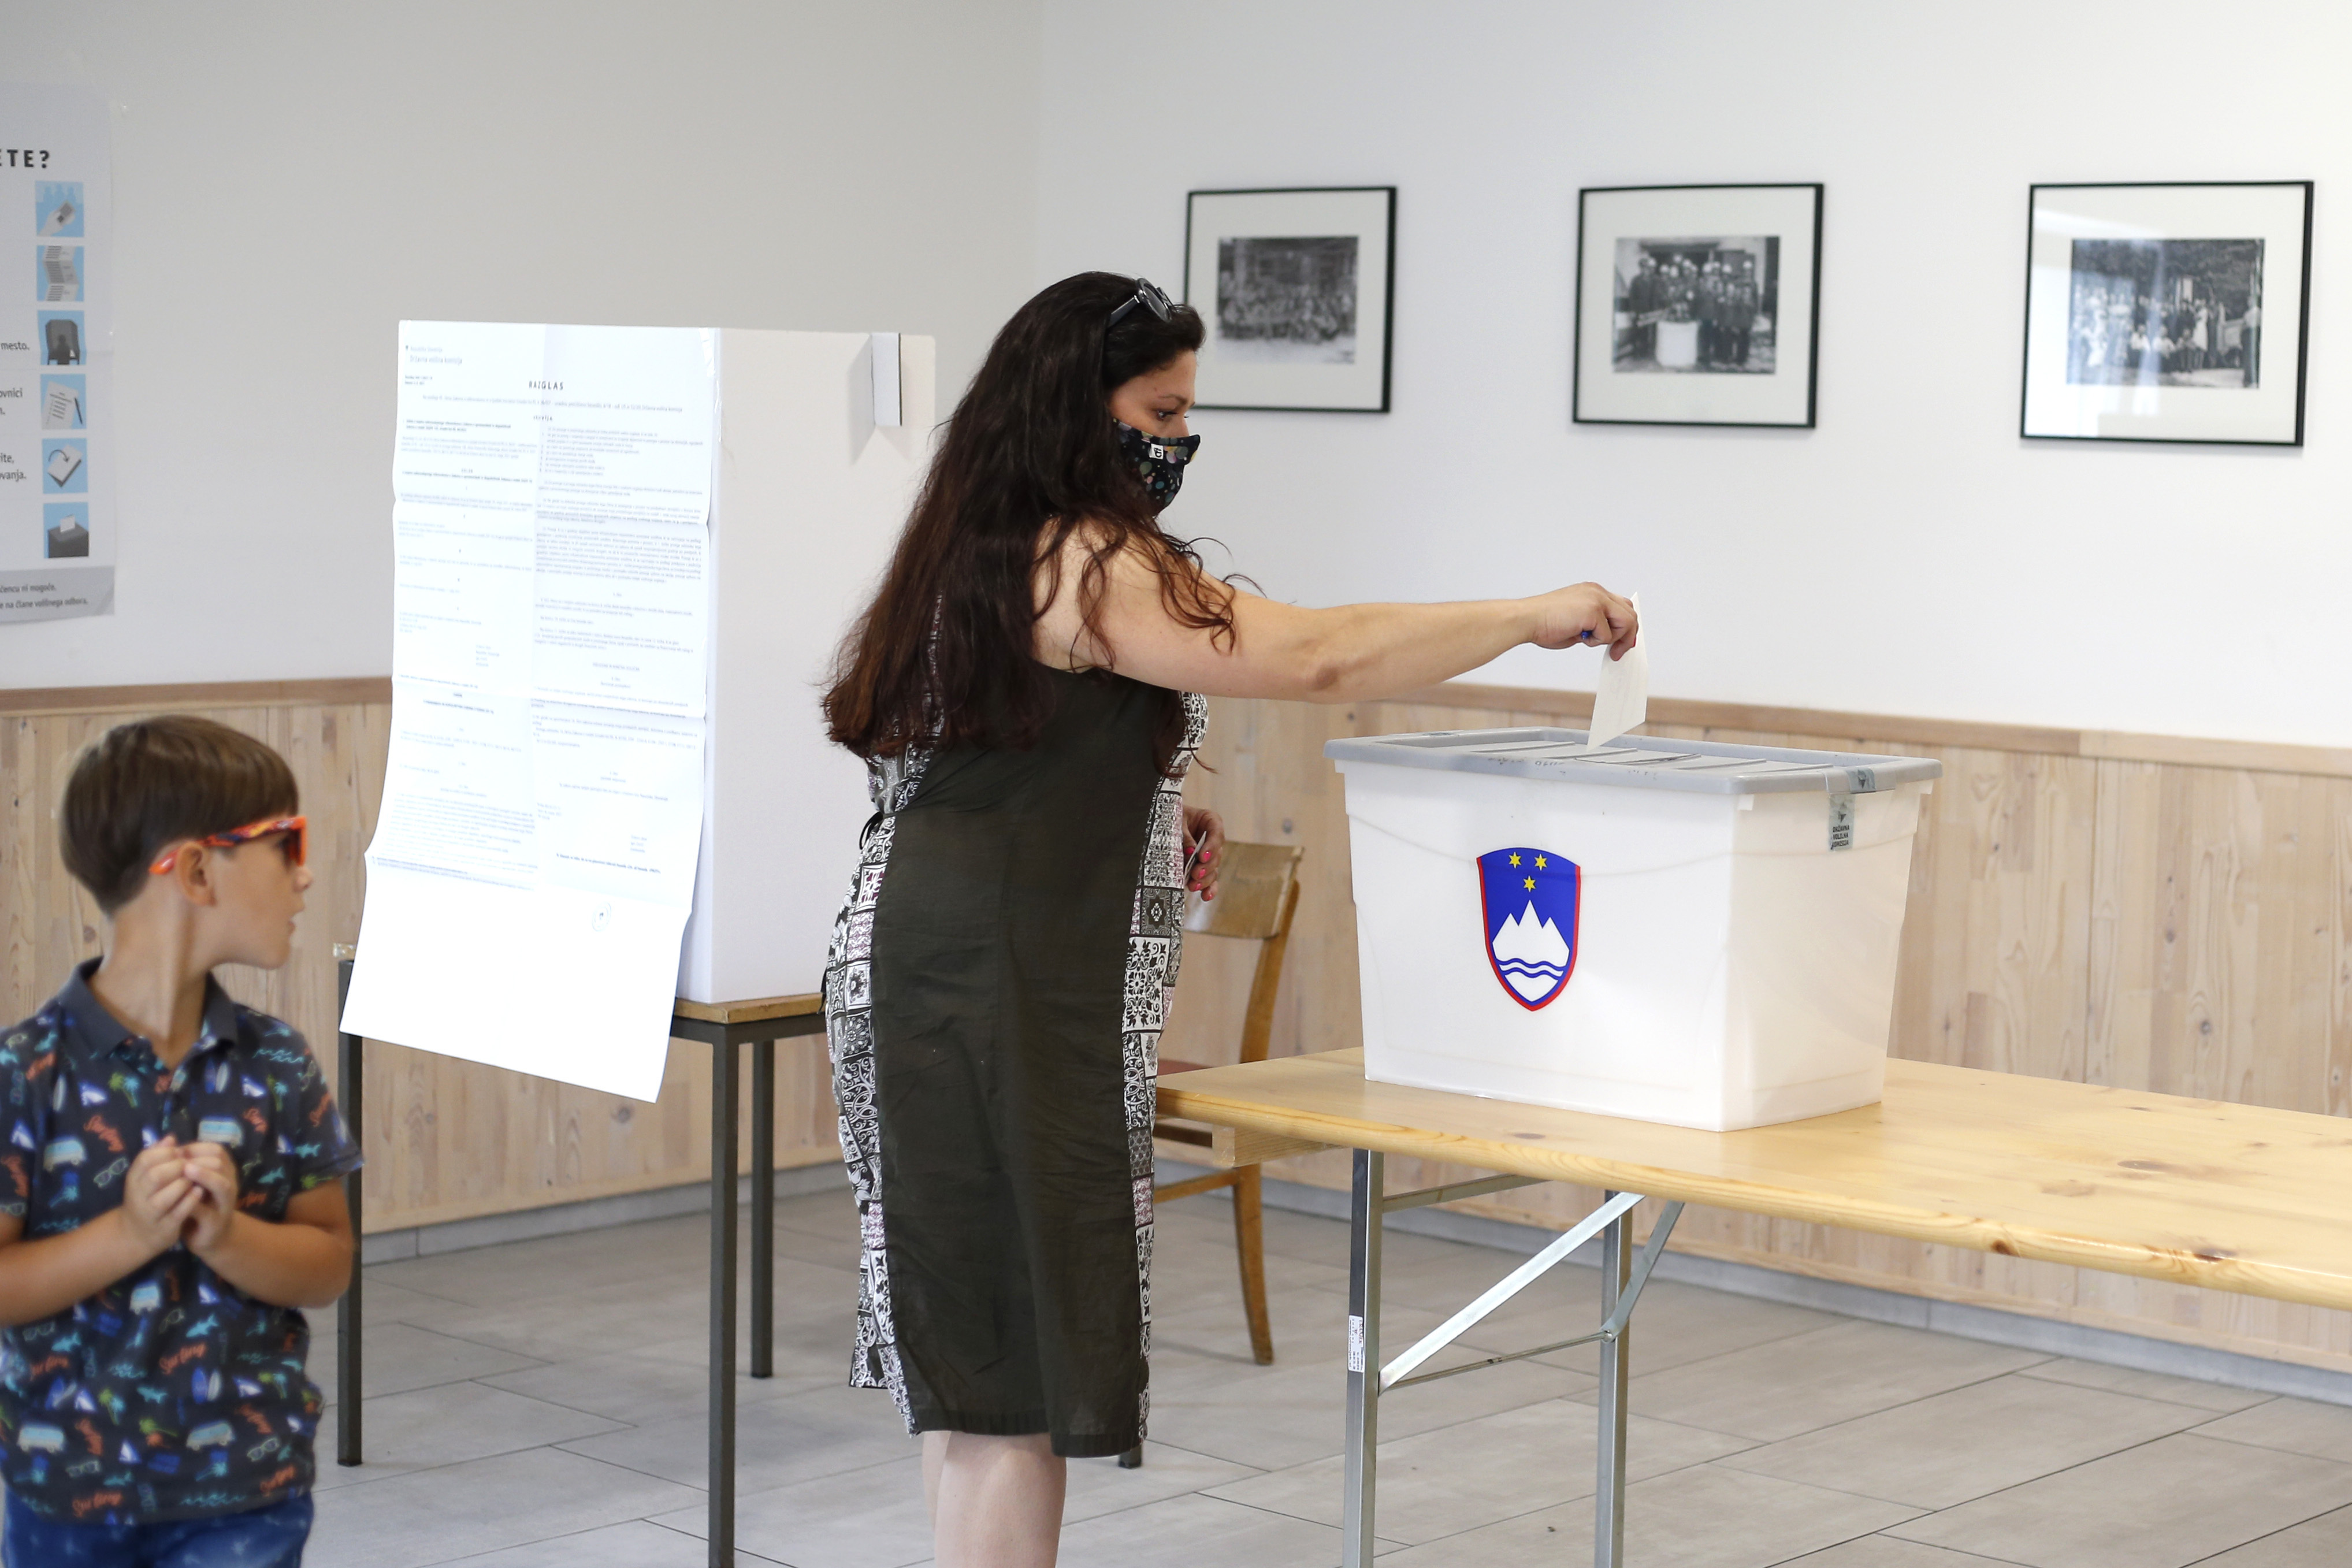 A voter casts her ballot at a polling station in Ravenska vas, Slovenia, Sunday, July 11, 2021. Slovenians voted in a referendum on changes to the country’s waters management law that is seen as a test for the government of right-wing Prime Minister Janez Jansa. Jansa’s government approved the amendments in March but ecologists have pushed through the referendum saying they threaten the environment by paving the way for construction by the sea, rivers and lakes. (AP Photo)